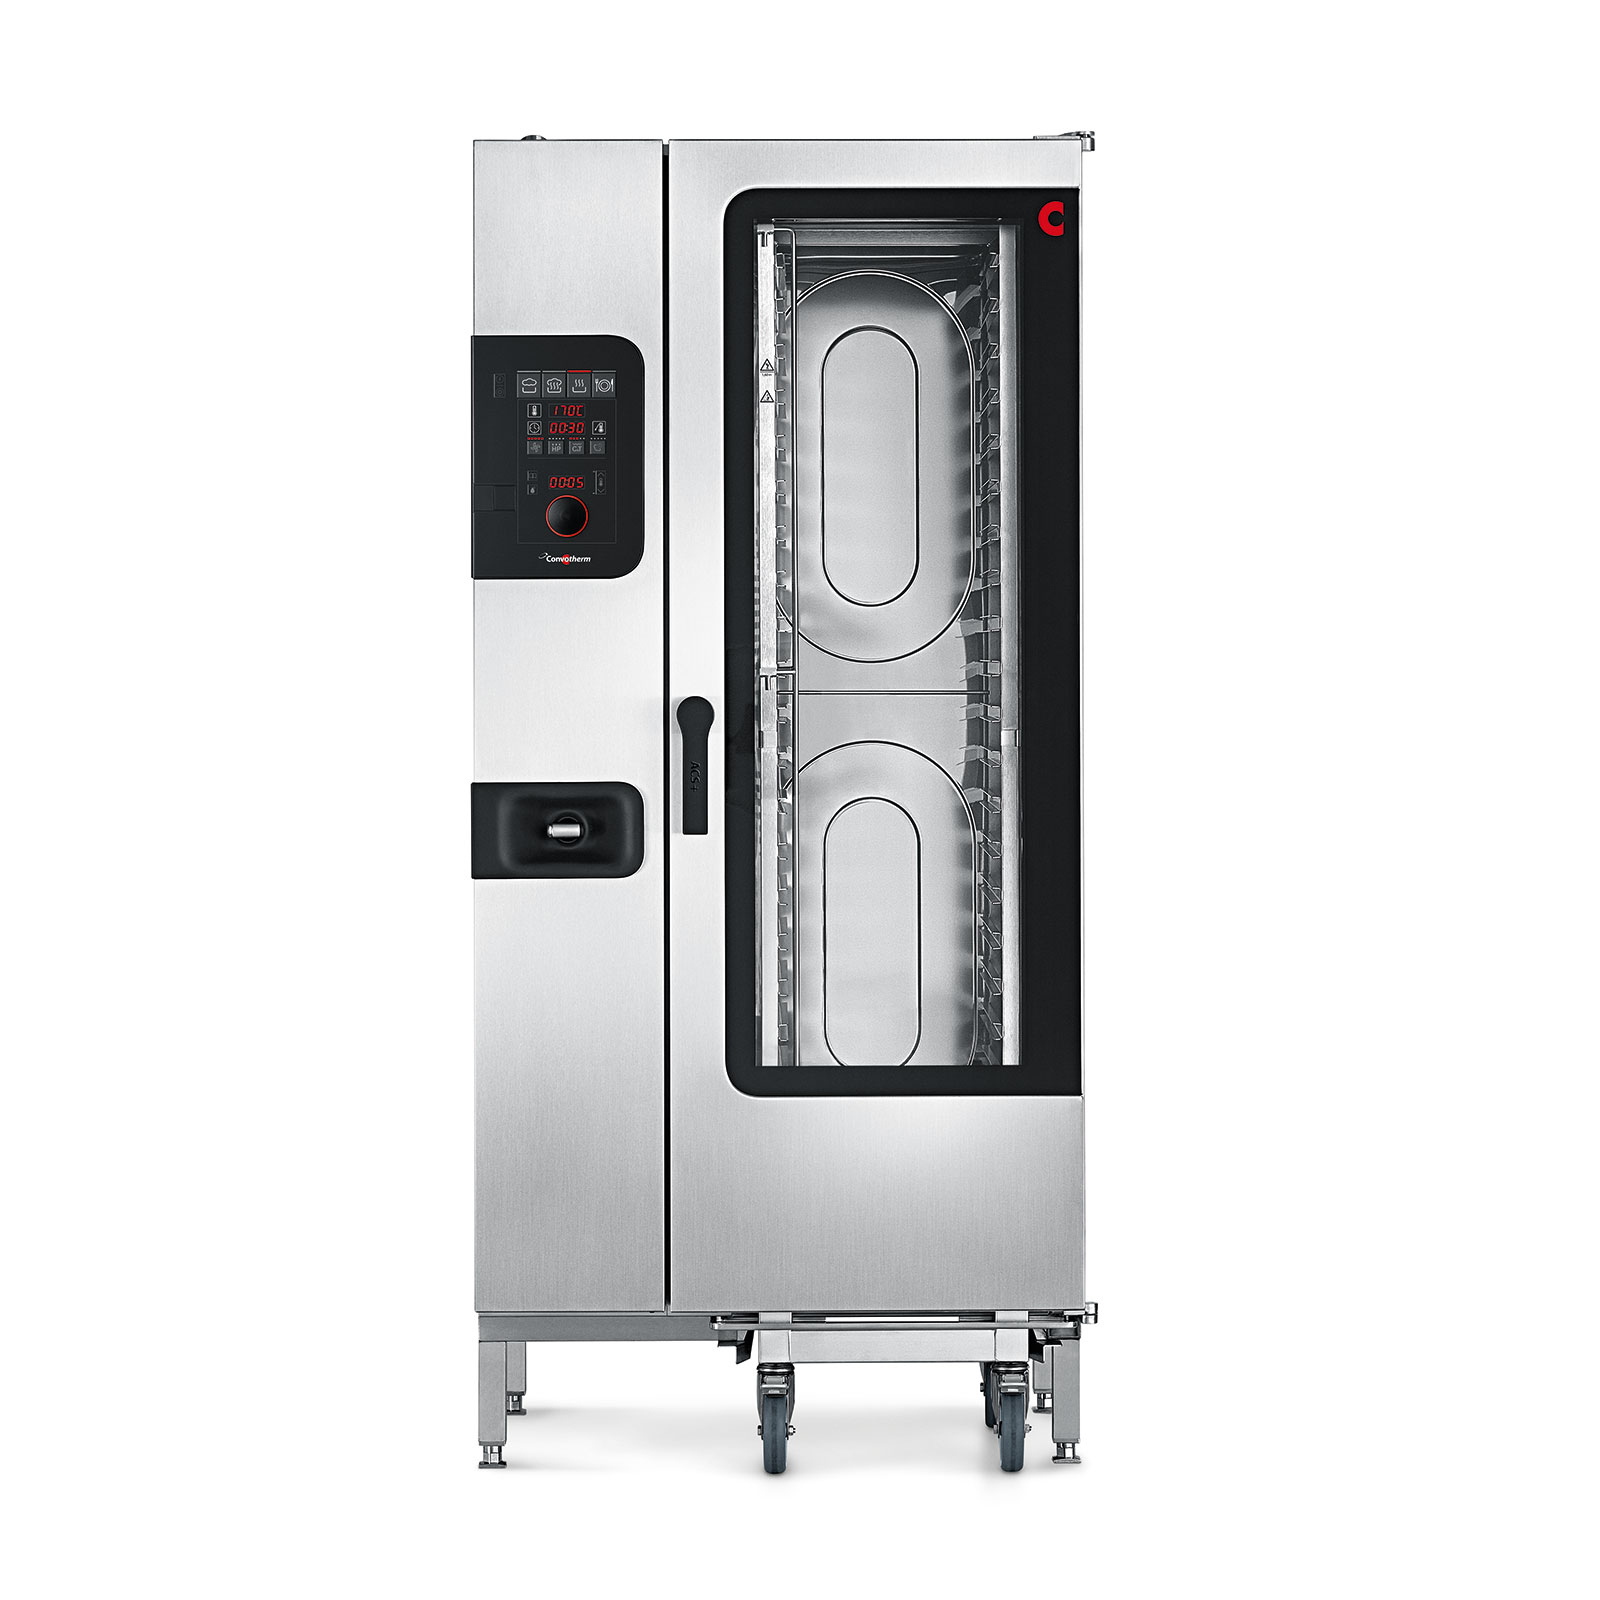 Convotherm C4 ED 20.10GS Half-Size Gas Combi Oven w/ Programmable Controls, Boilerless